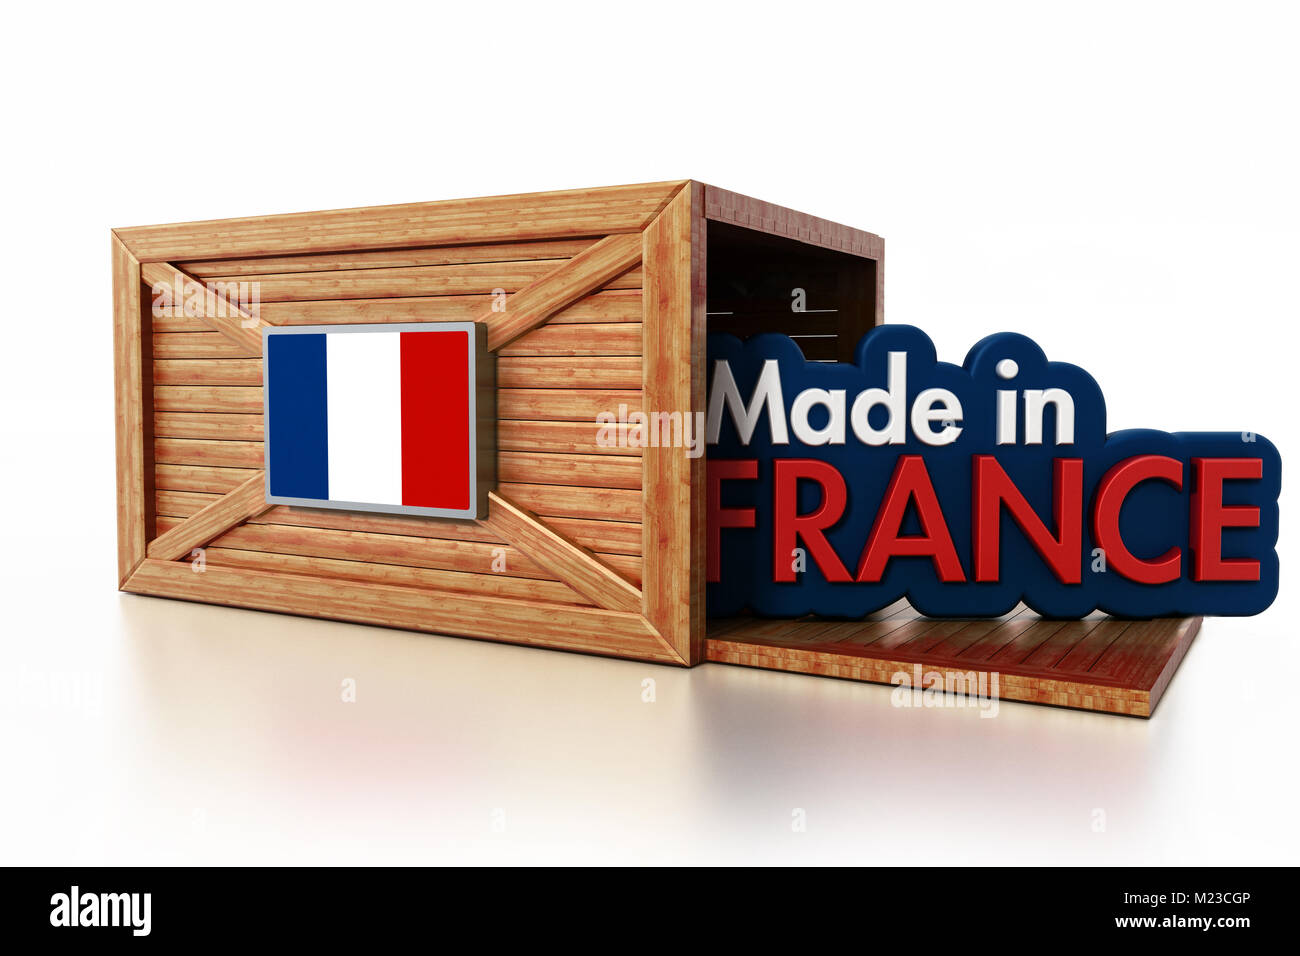 Made in France text inside cargo box with French flag. 3D illustration. Stock Photo